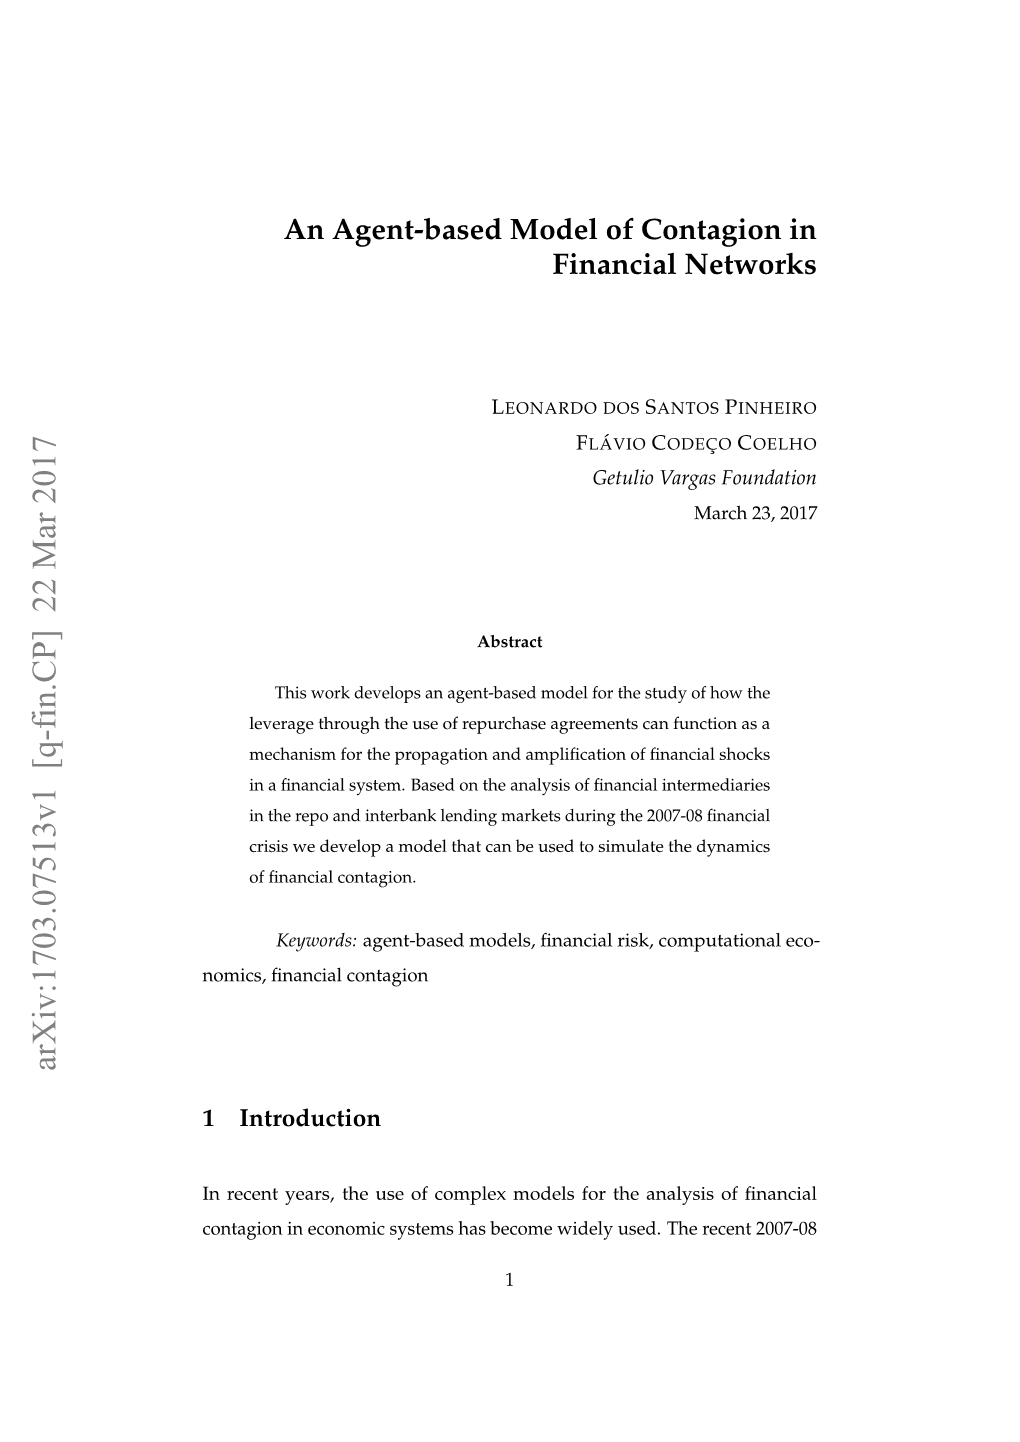 An Agent-Based Model of Contagion in Financial Networks